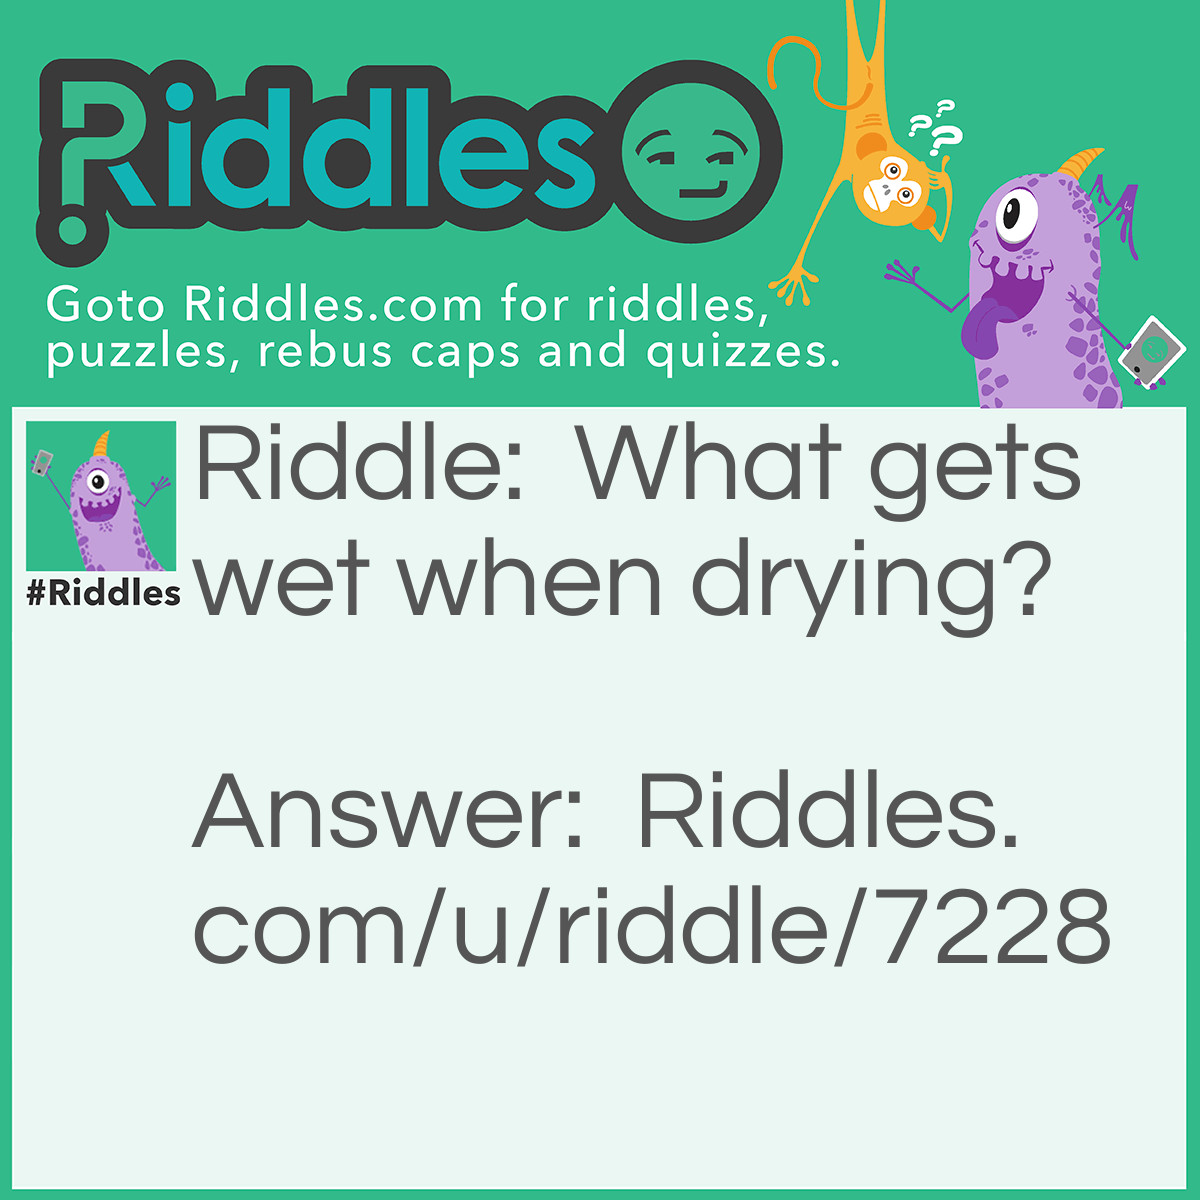 Riddle: What gets wet when drying? Answer: A Towel.